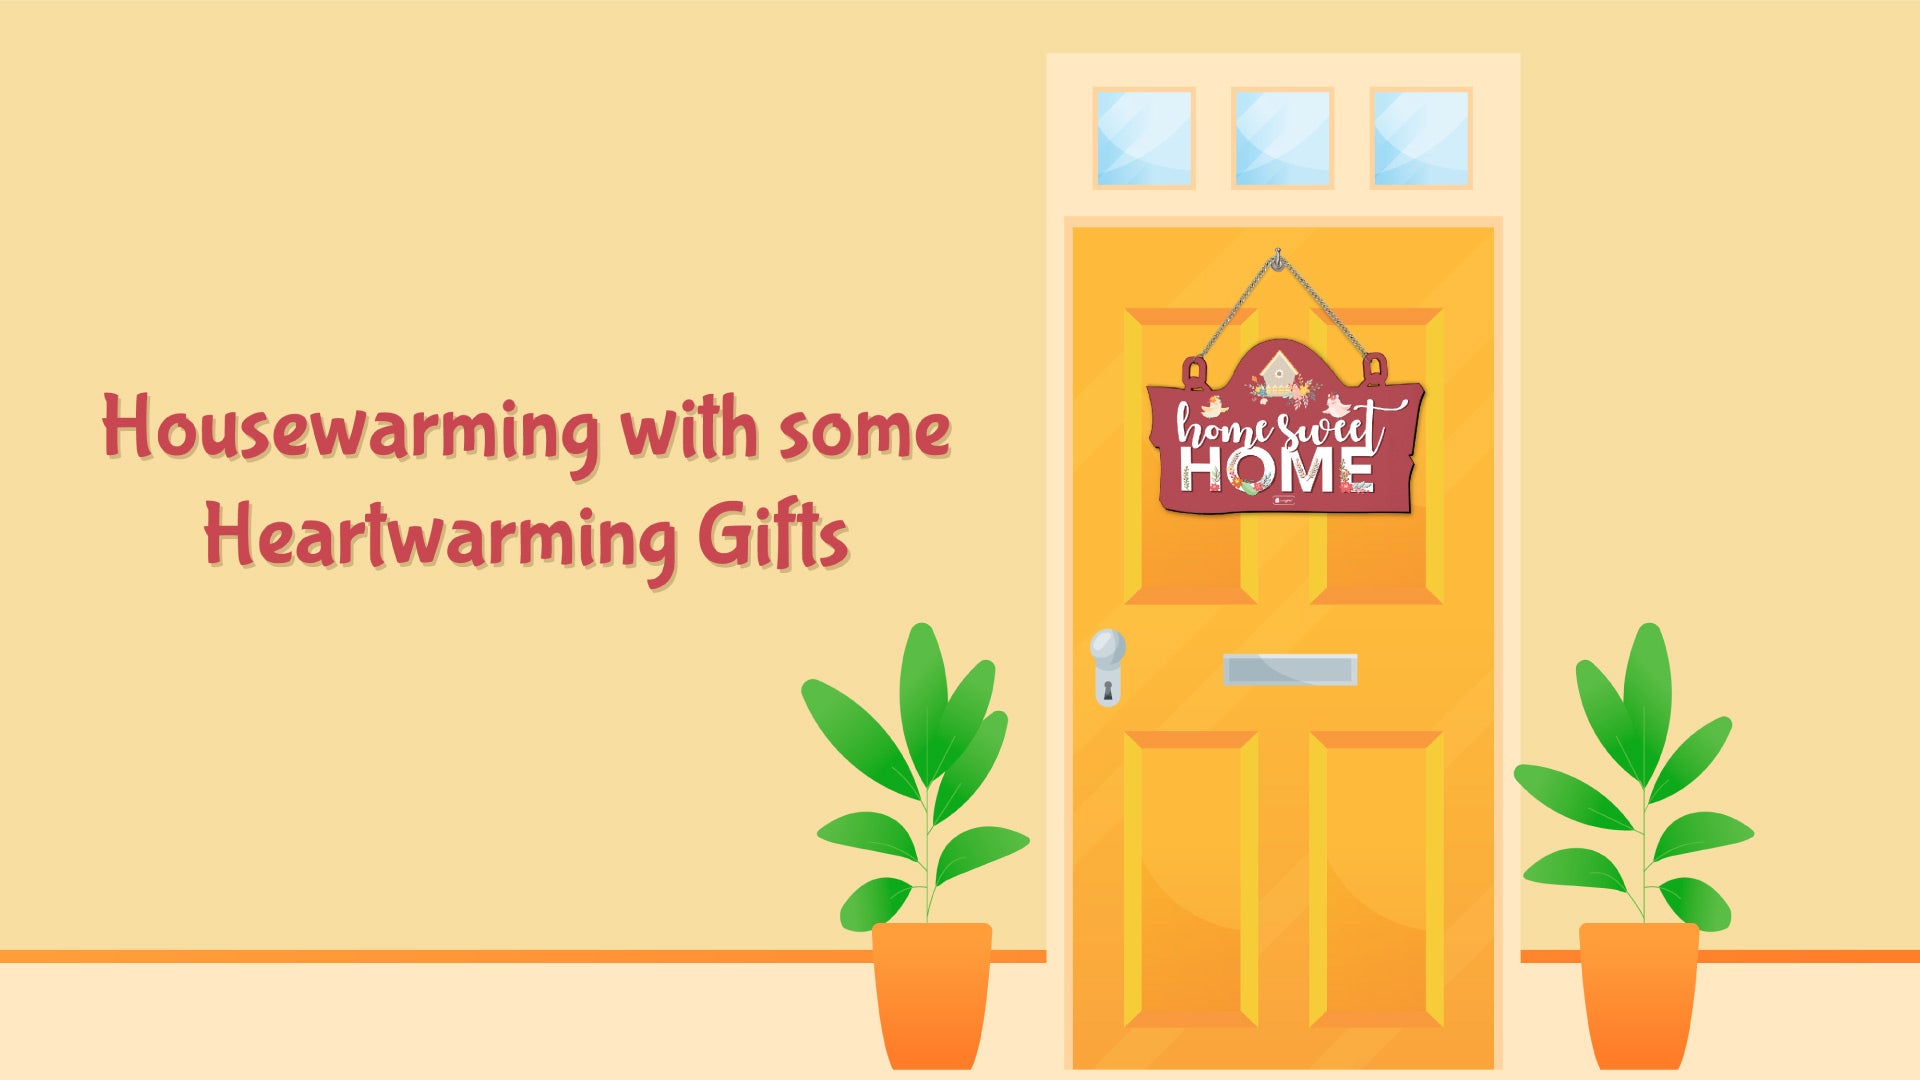 Buy GIFTAGIRL Housewarming Gifts for New Home - Pretty House Warming Gifts,  Our Personalized Pots are Ideal Gift Ideas for First Homes, Couples, New  Homes, or Apartments and Arrive Beautifully Gift Boxed